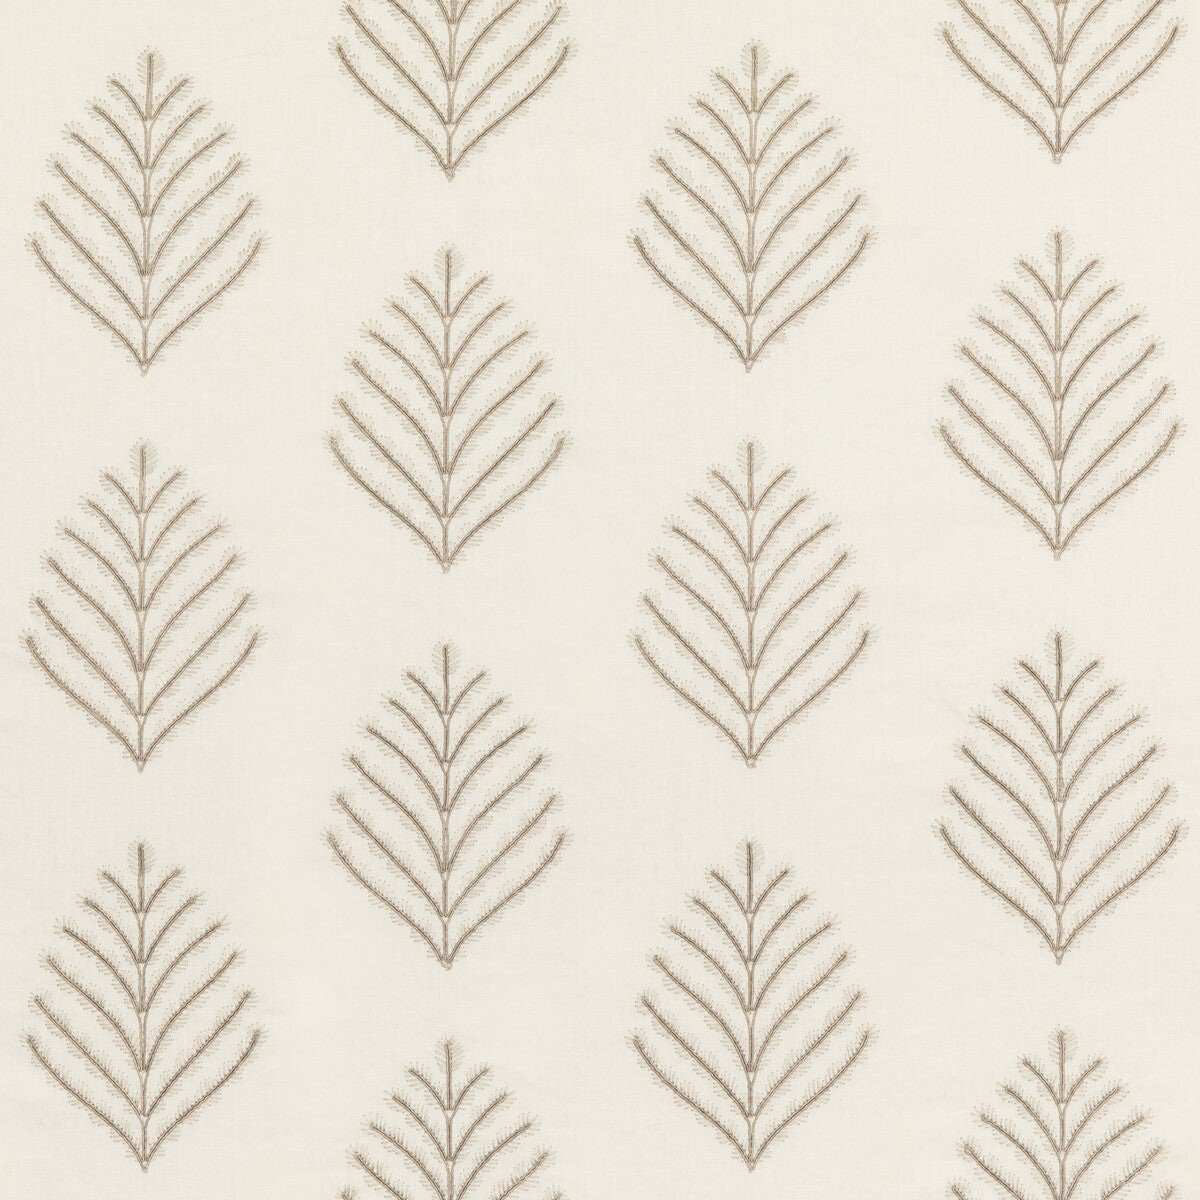 Treen fabric in ivory/stone color - pattern BF10800.3.0 - by G P &amp; J Baker in the Artisan II collection